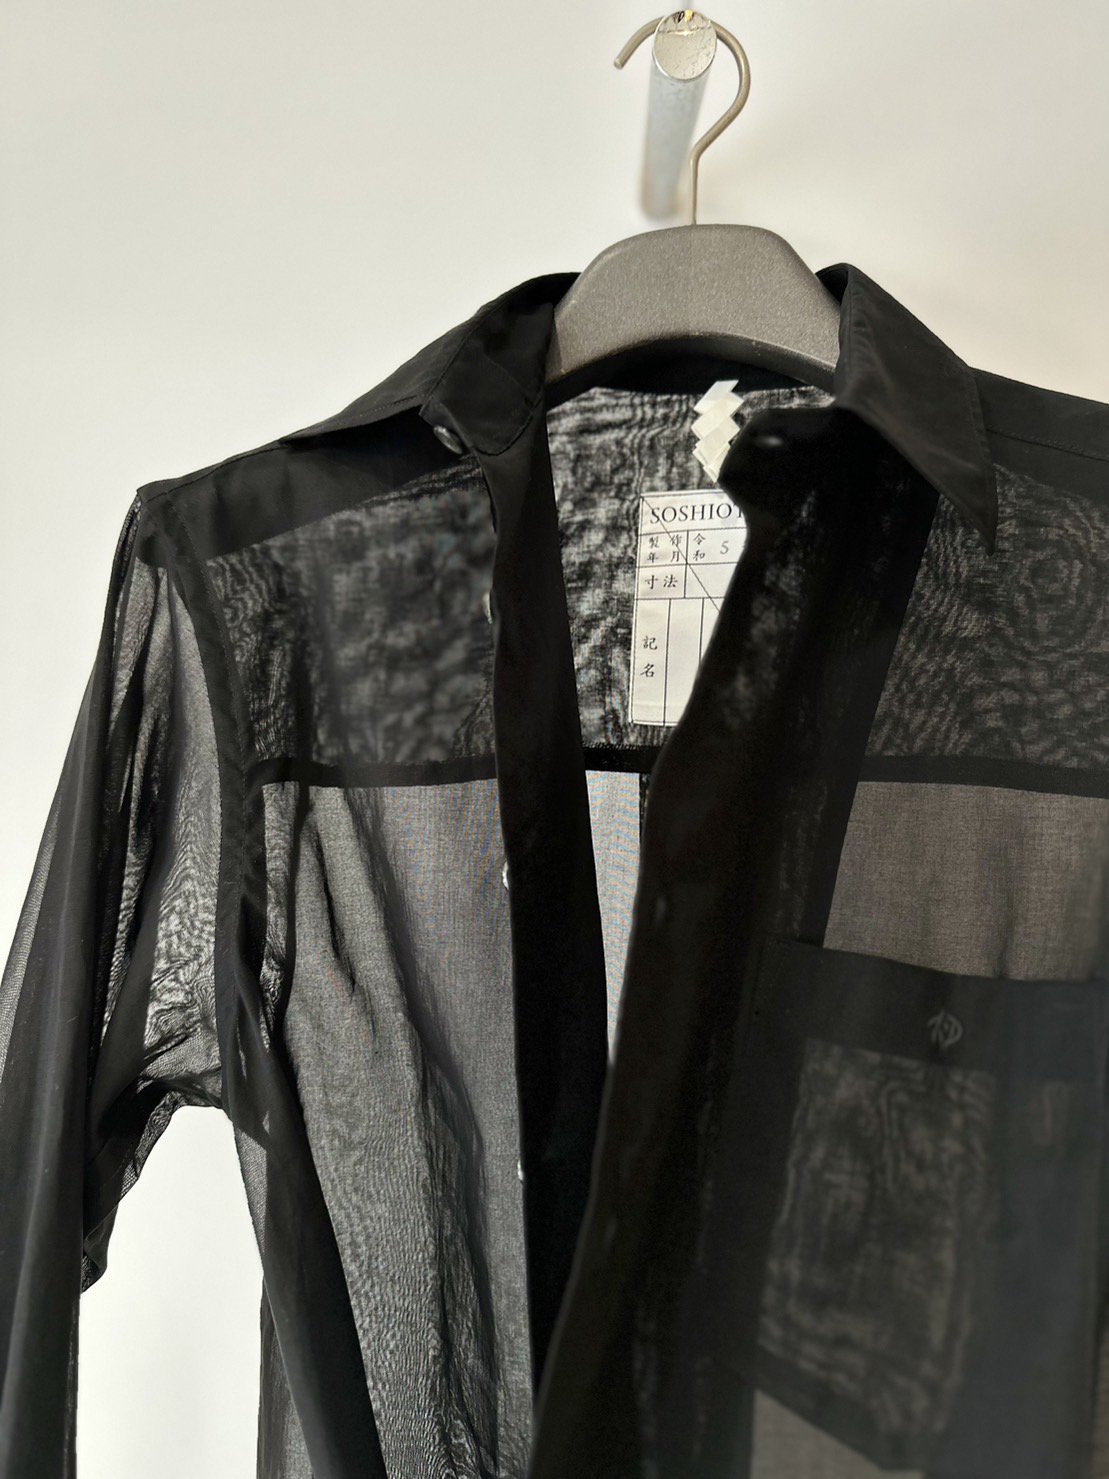 SOSHIOTSUKI<br />THE KIMONO BRESTED SHIRTS VOILE / BLACK<img class='new_mark_img2' src='https://img.shop-pro.jp/img/new/icons14.gif' style='border:none;display:inline;margin:0px;padding:0px;width:auto;' />